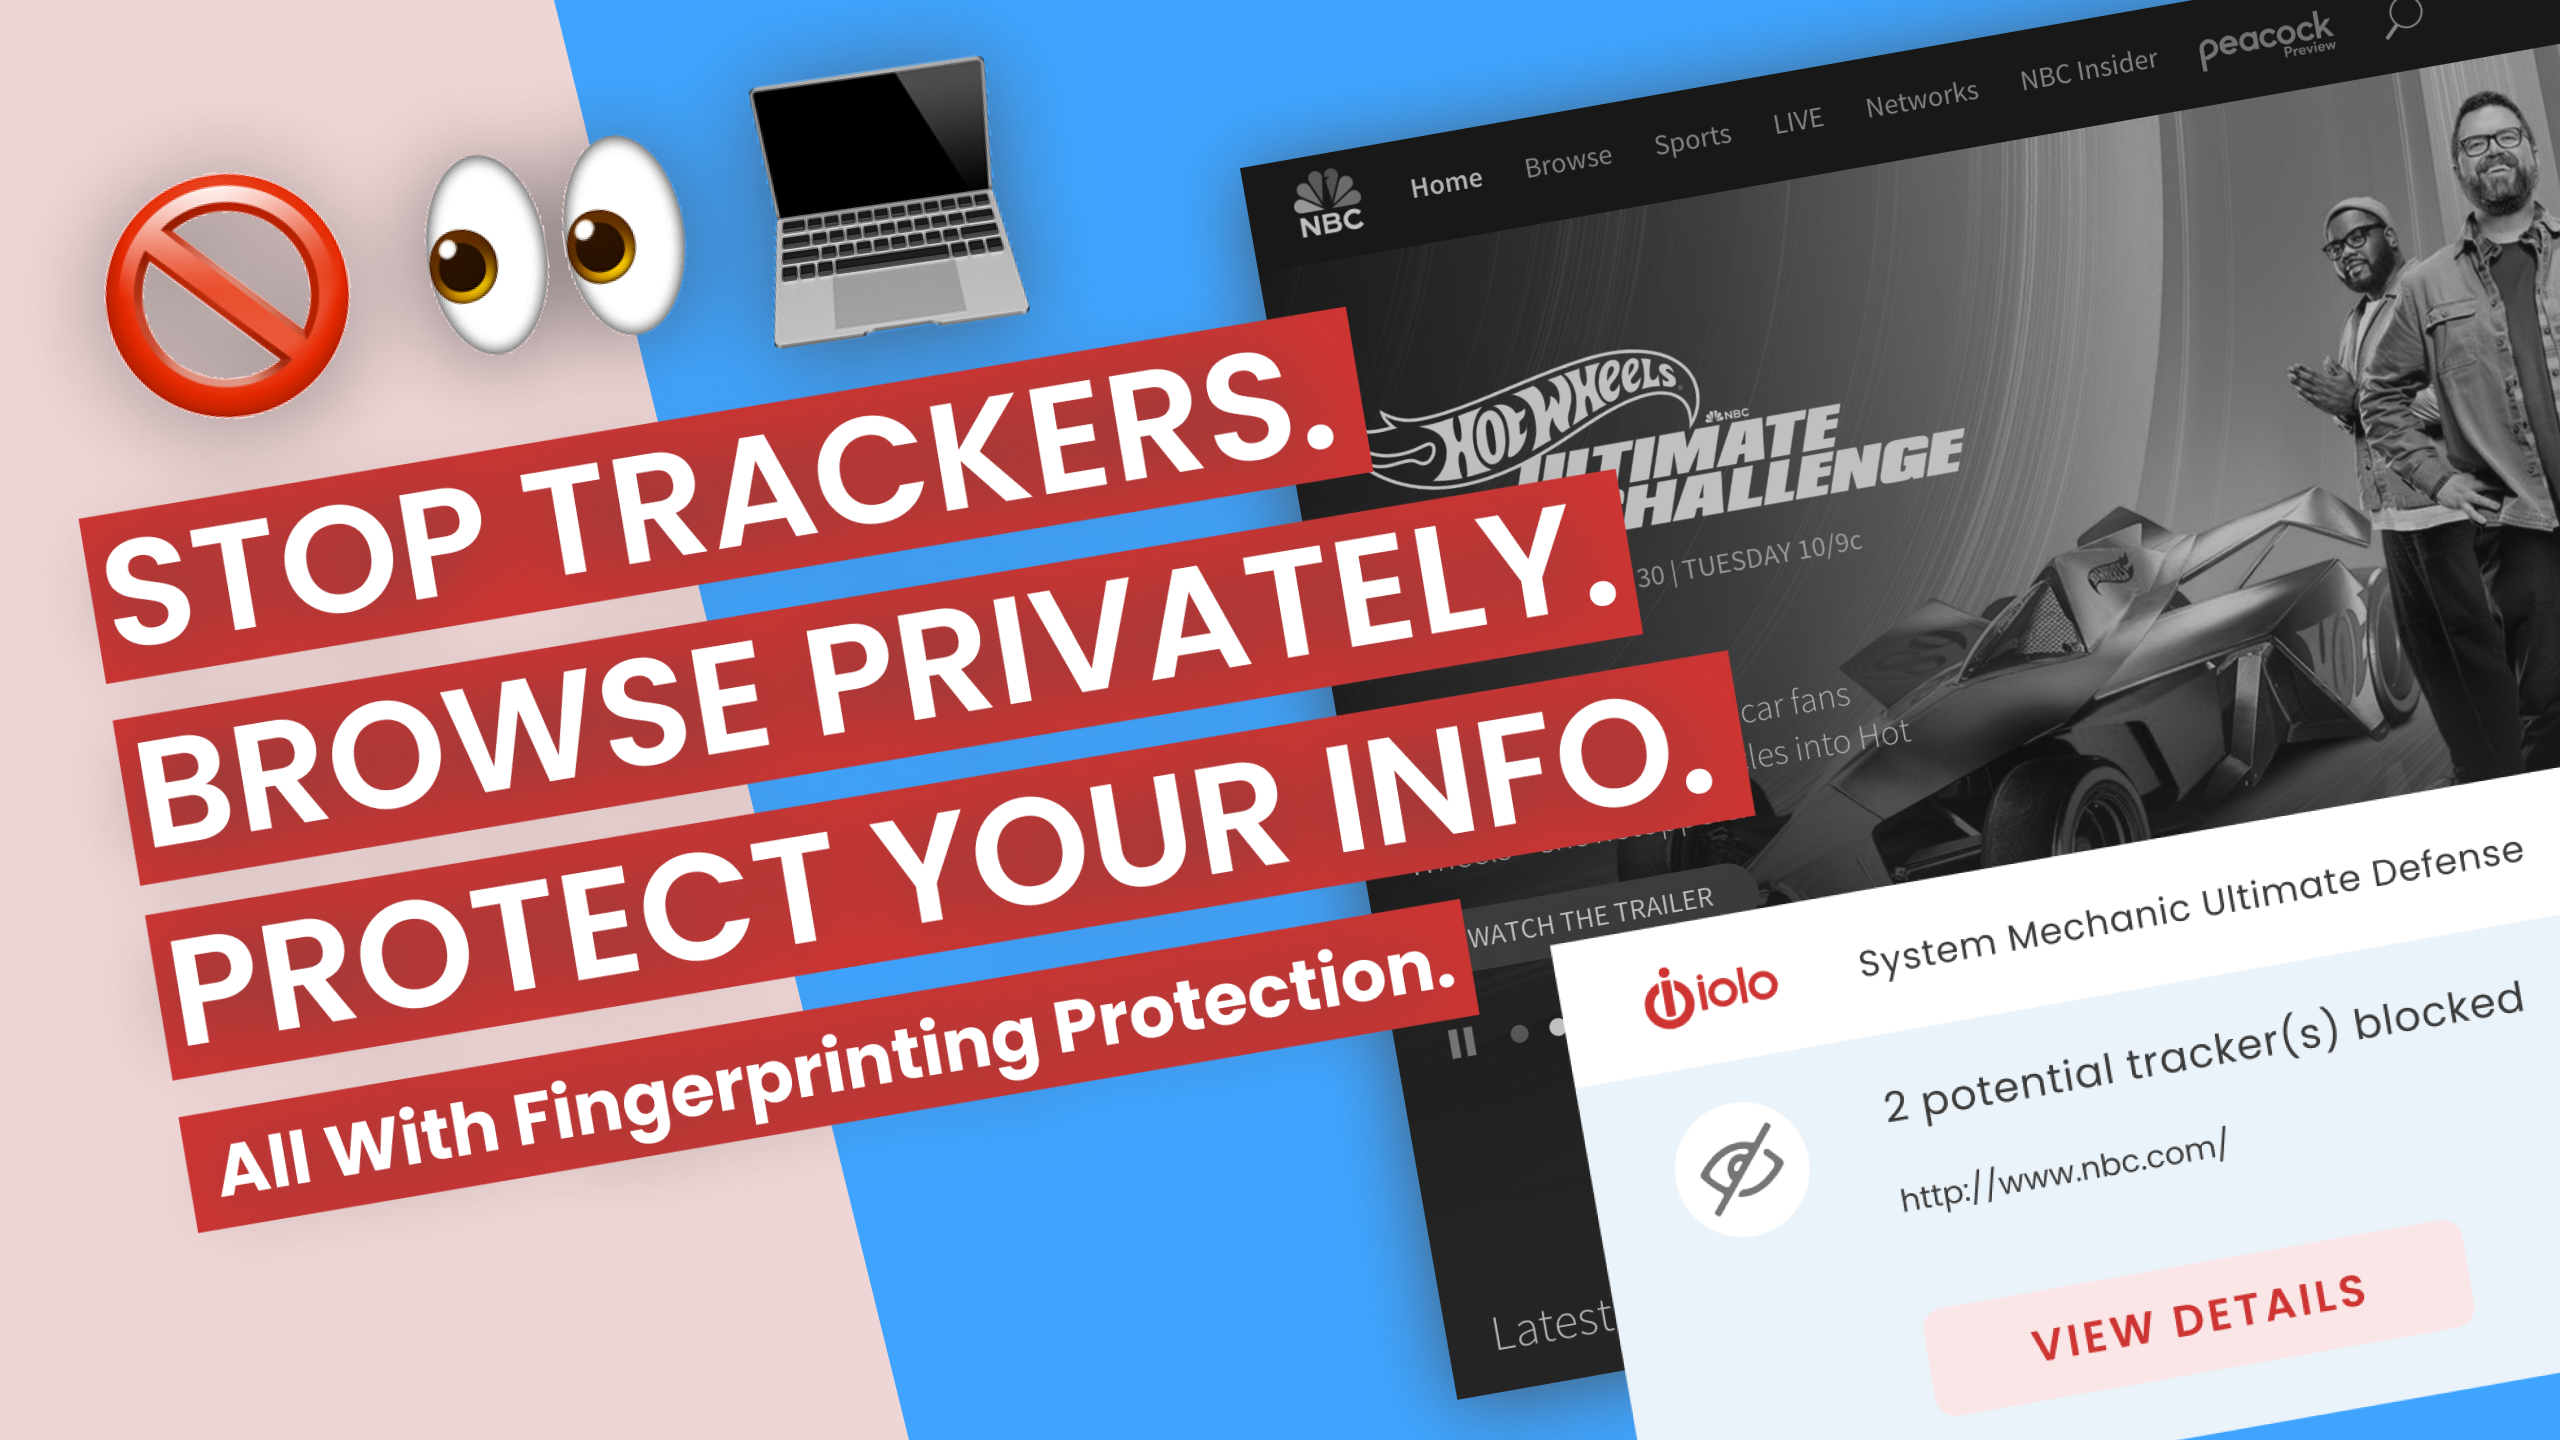 stop trackers browse privately protect your info yt thumbnail